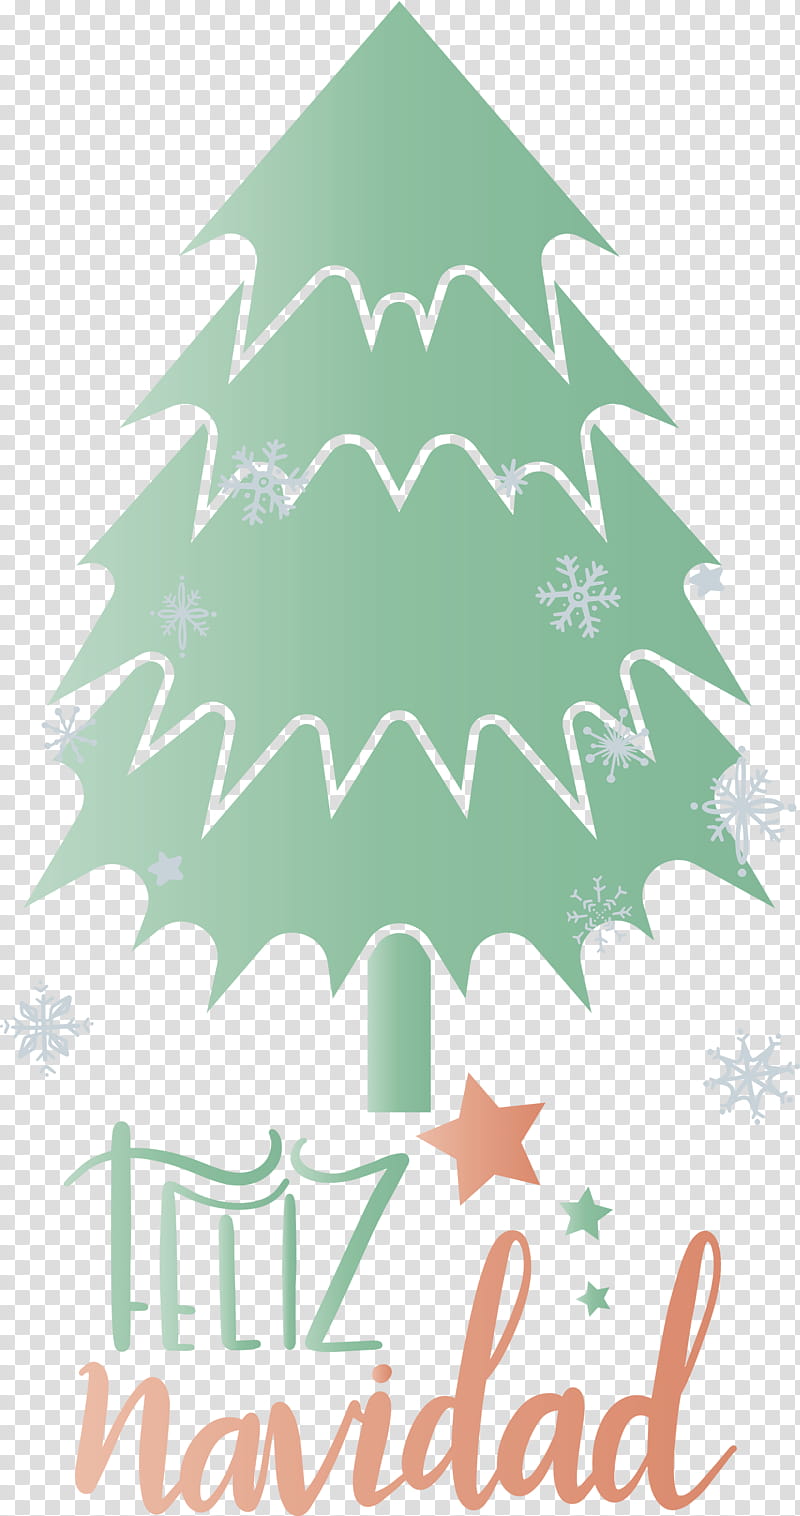 Merry Christmas Christmas Tree, Christmas Day, Text, Feliz Navidad 3, Christmas Ornament, Mothers Day, Printing, Lens transparent background PNG clipart